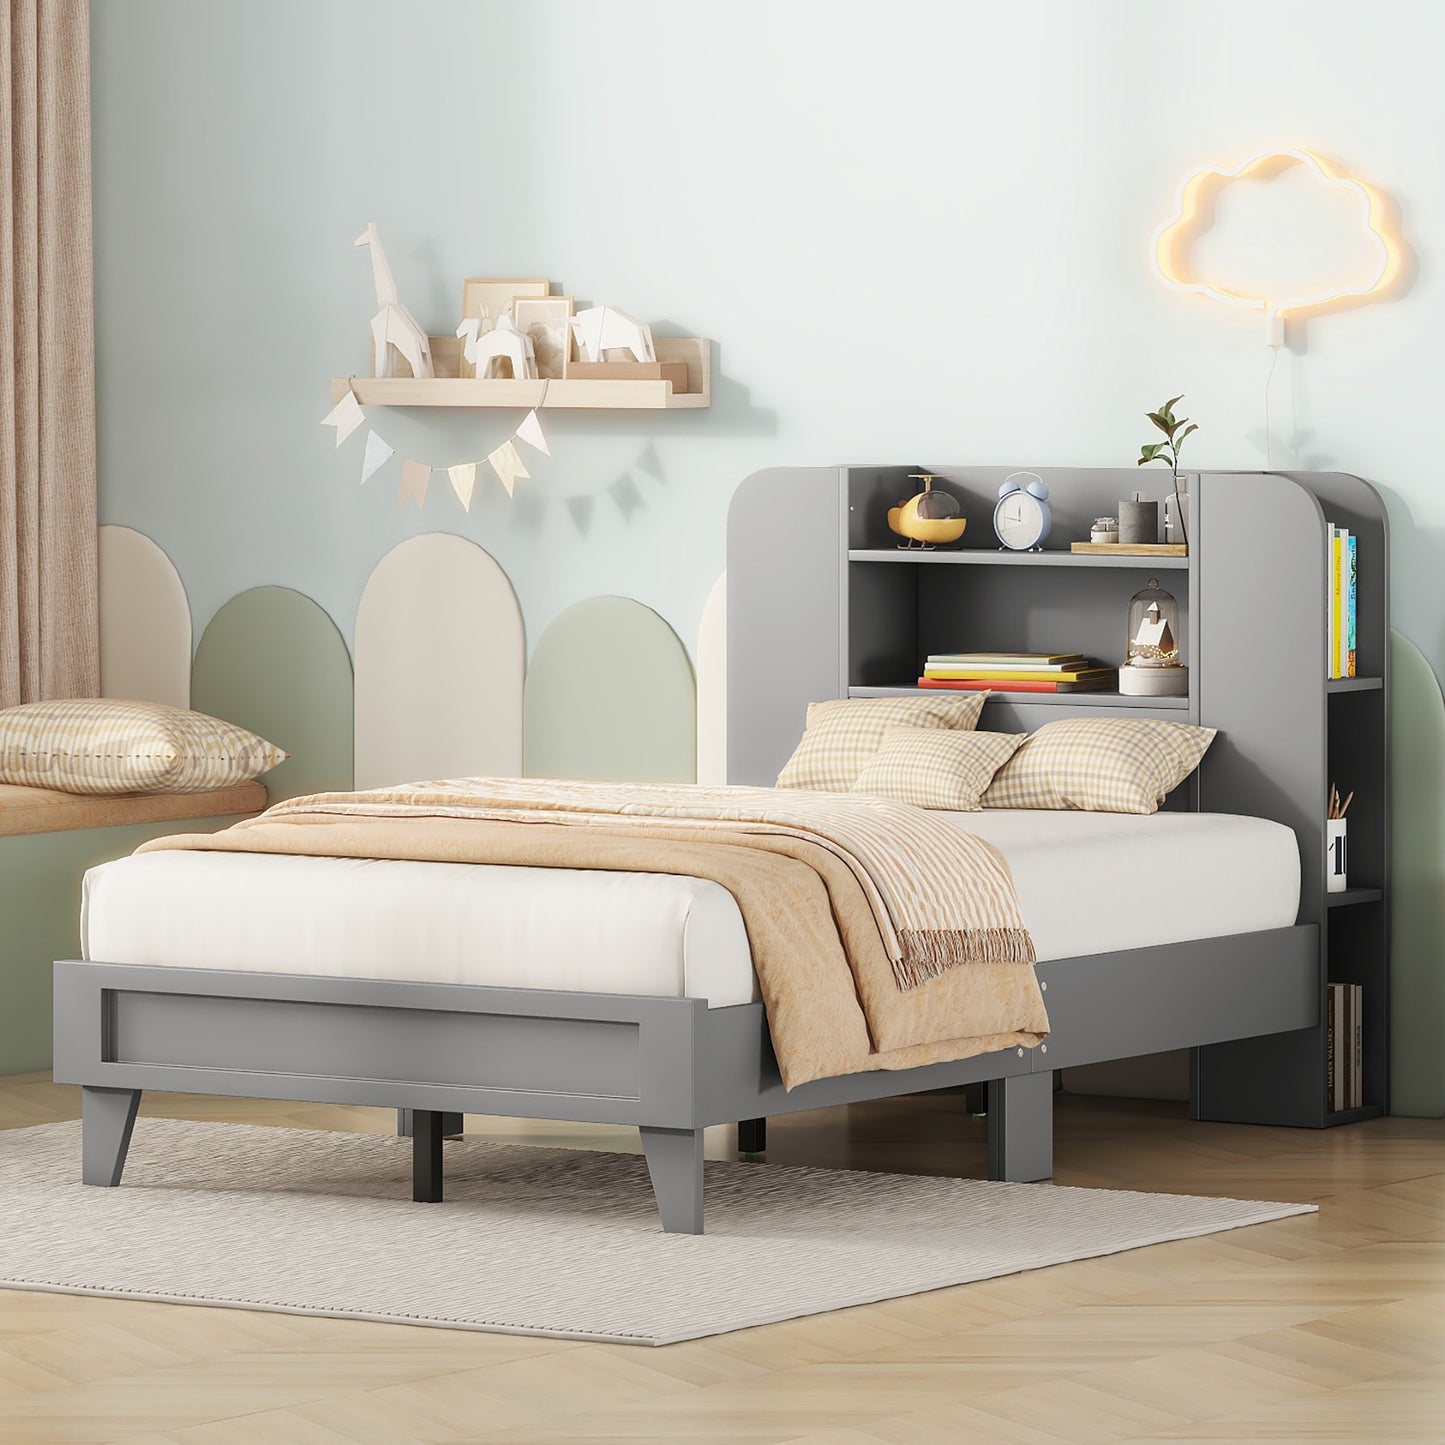 Twin Size Platform Bed with Storage Headboard,Multiple Storage Shelves on Both Sides,Grey